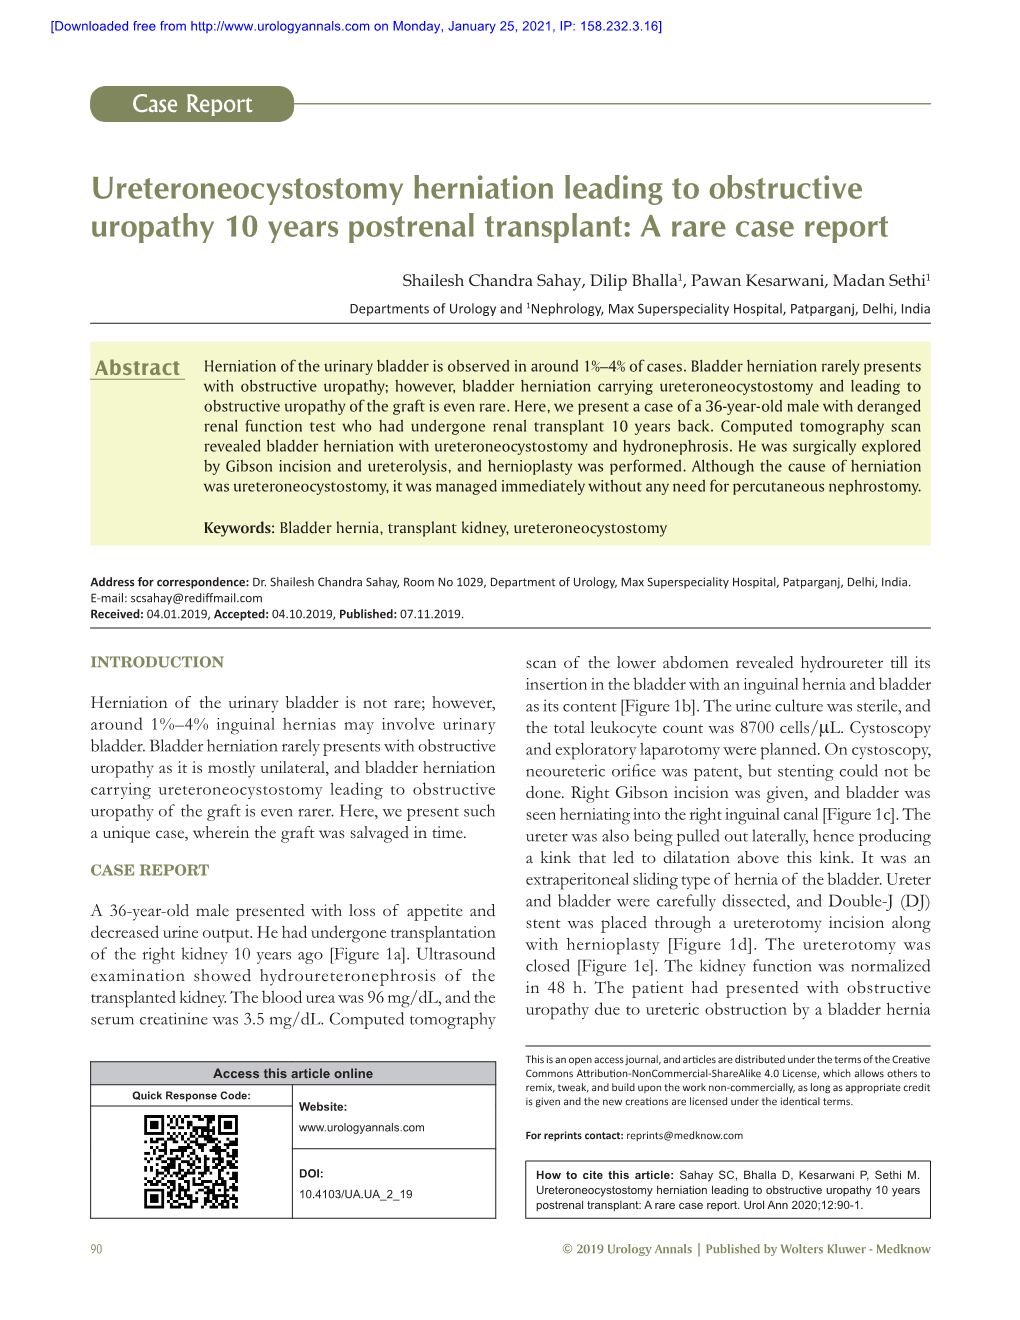 Ureteroneocystostomy Herniation Leading to Obstructive Uropathy 10 Years Postrenal Transplant: a Rare Case Report